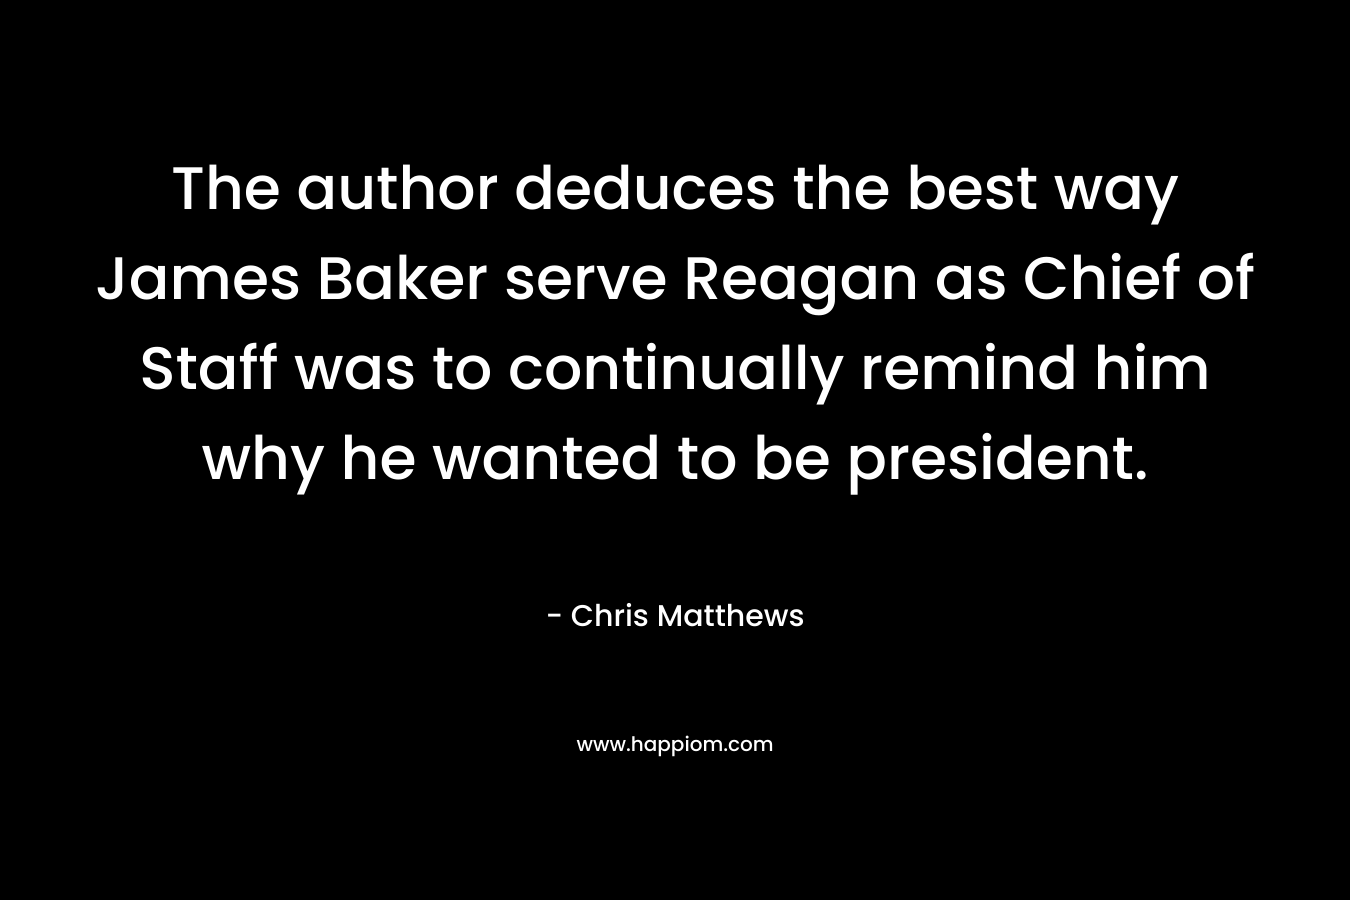 The author deduces the best way James Baker serve Reagan as Chief of Staff was to continually remind him why he wanted to be president. – Chris Matthews